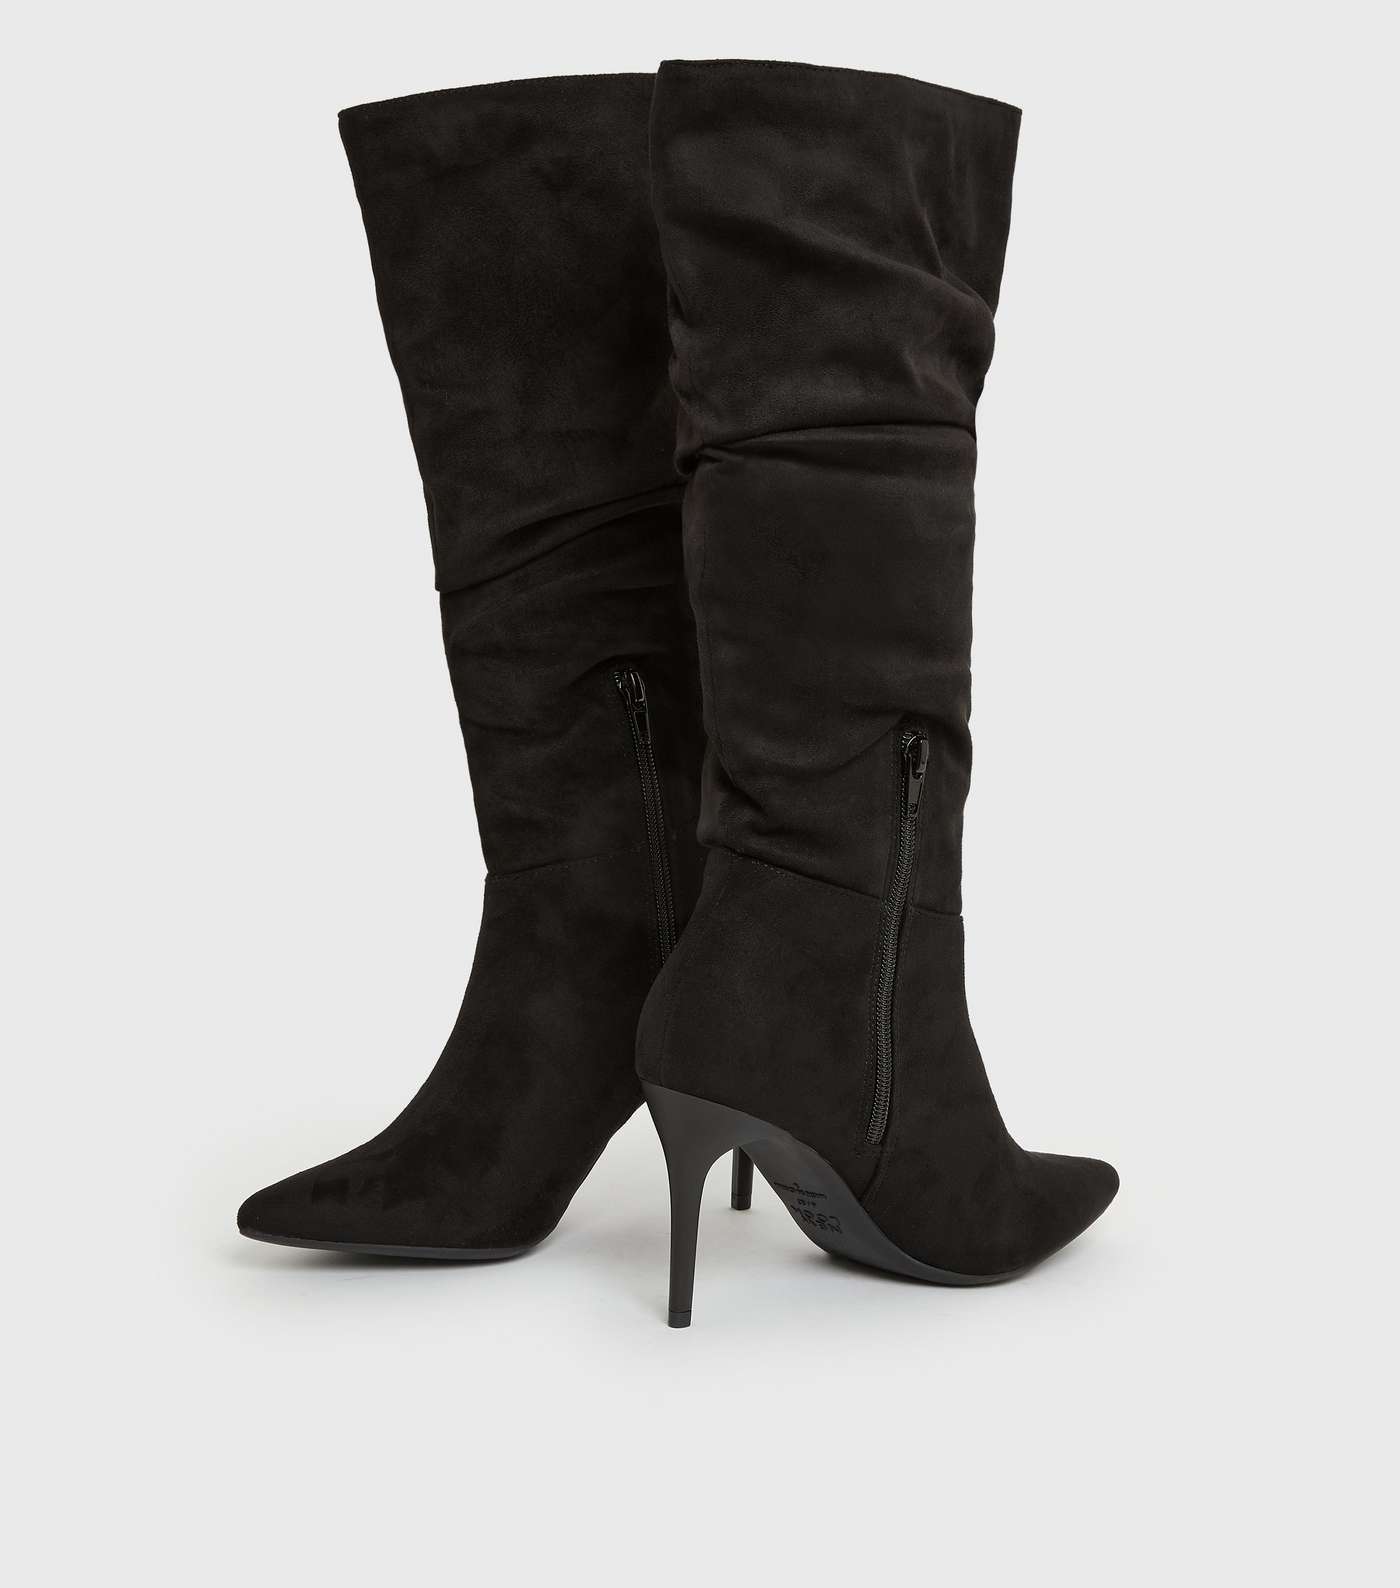 Black Stiletto Heel Slouch Knee High Boots Image 3